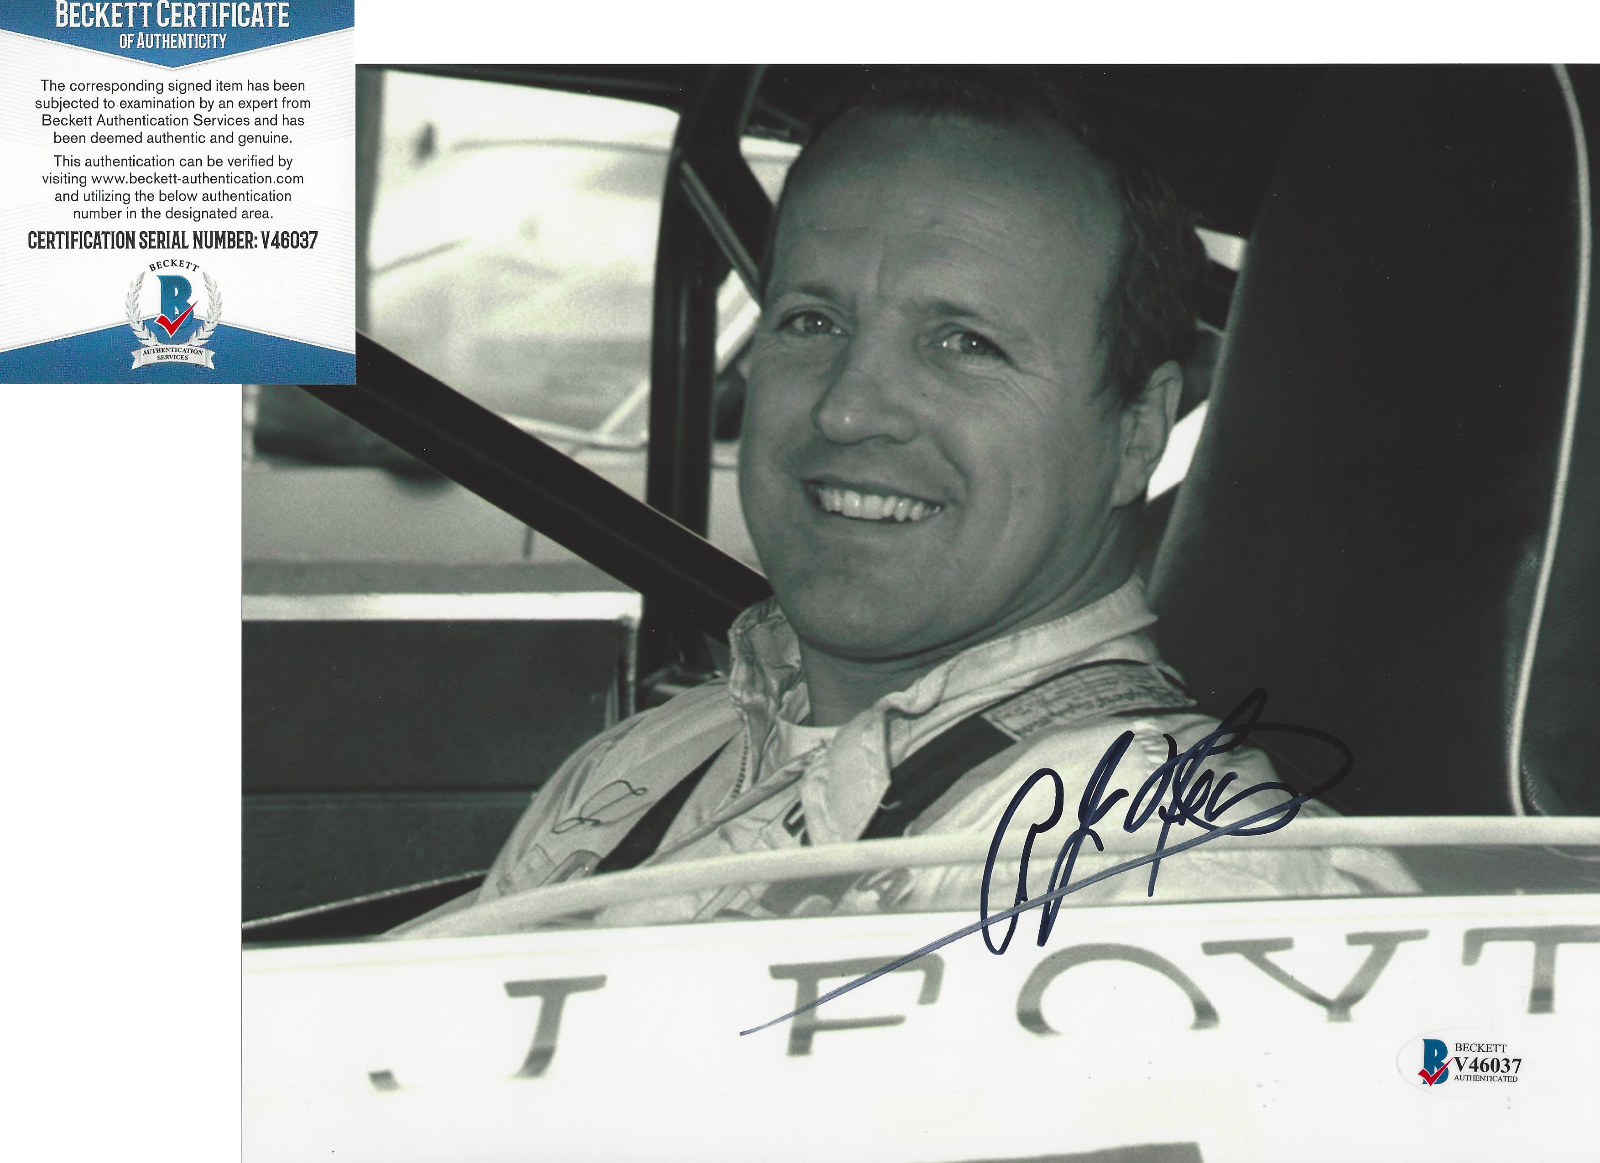 A.J. FOYT SIGNED 8x10 PHOTO INDY 500 Free shipping anywhere in the nation CHAMPION DRIVER Memphis Mall 6 CAR BE AJ